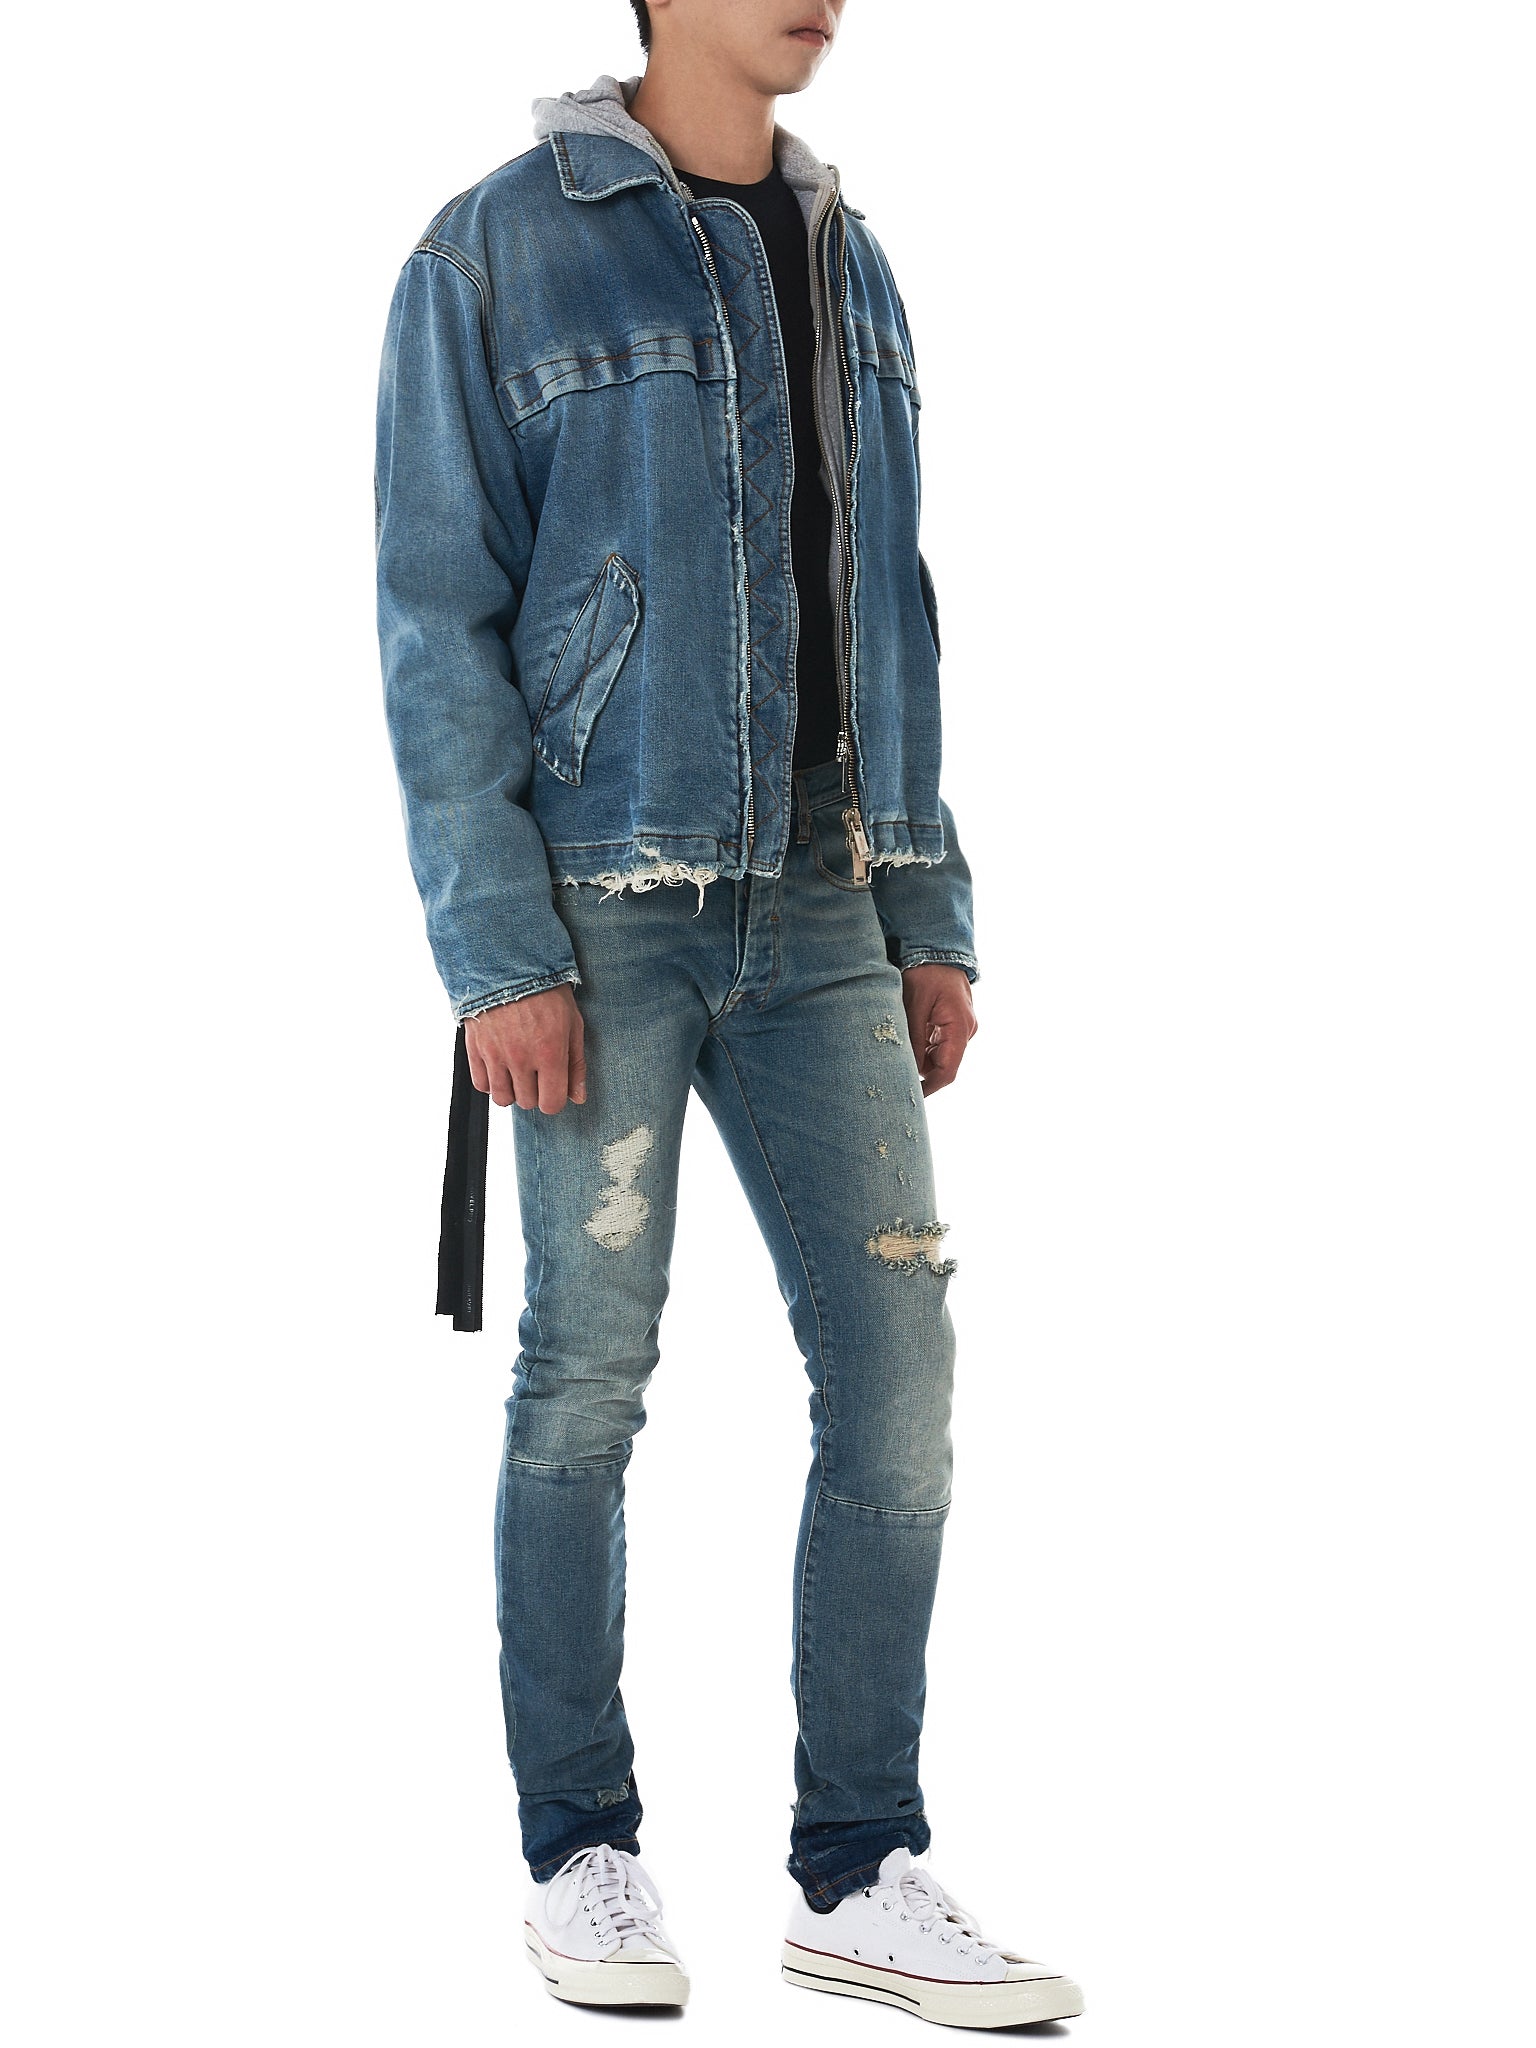 Unravel Distressed Jeans - Hlorenzo Style